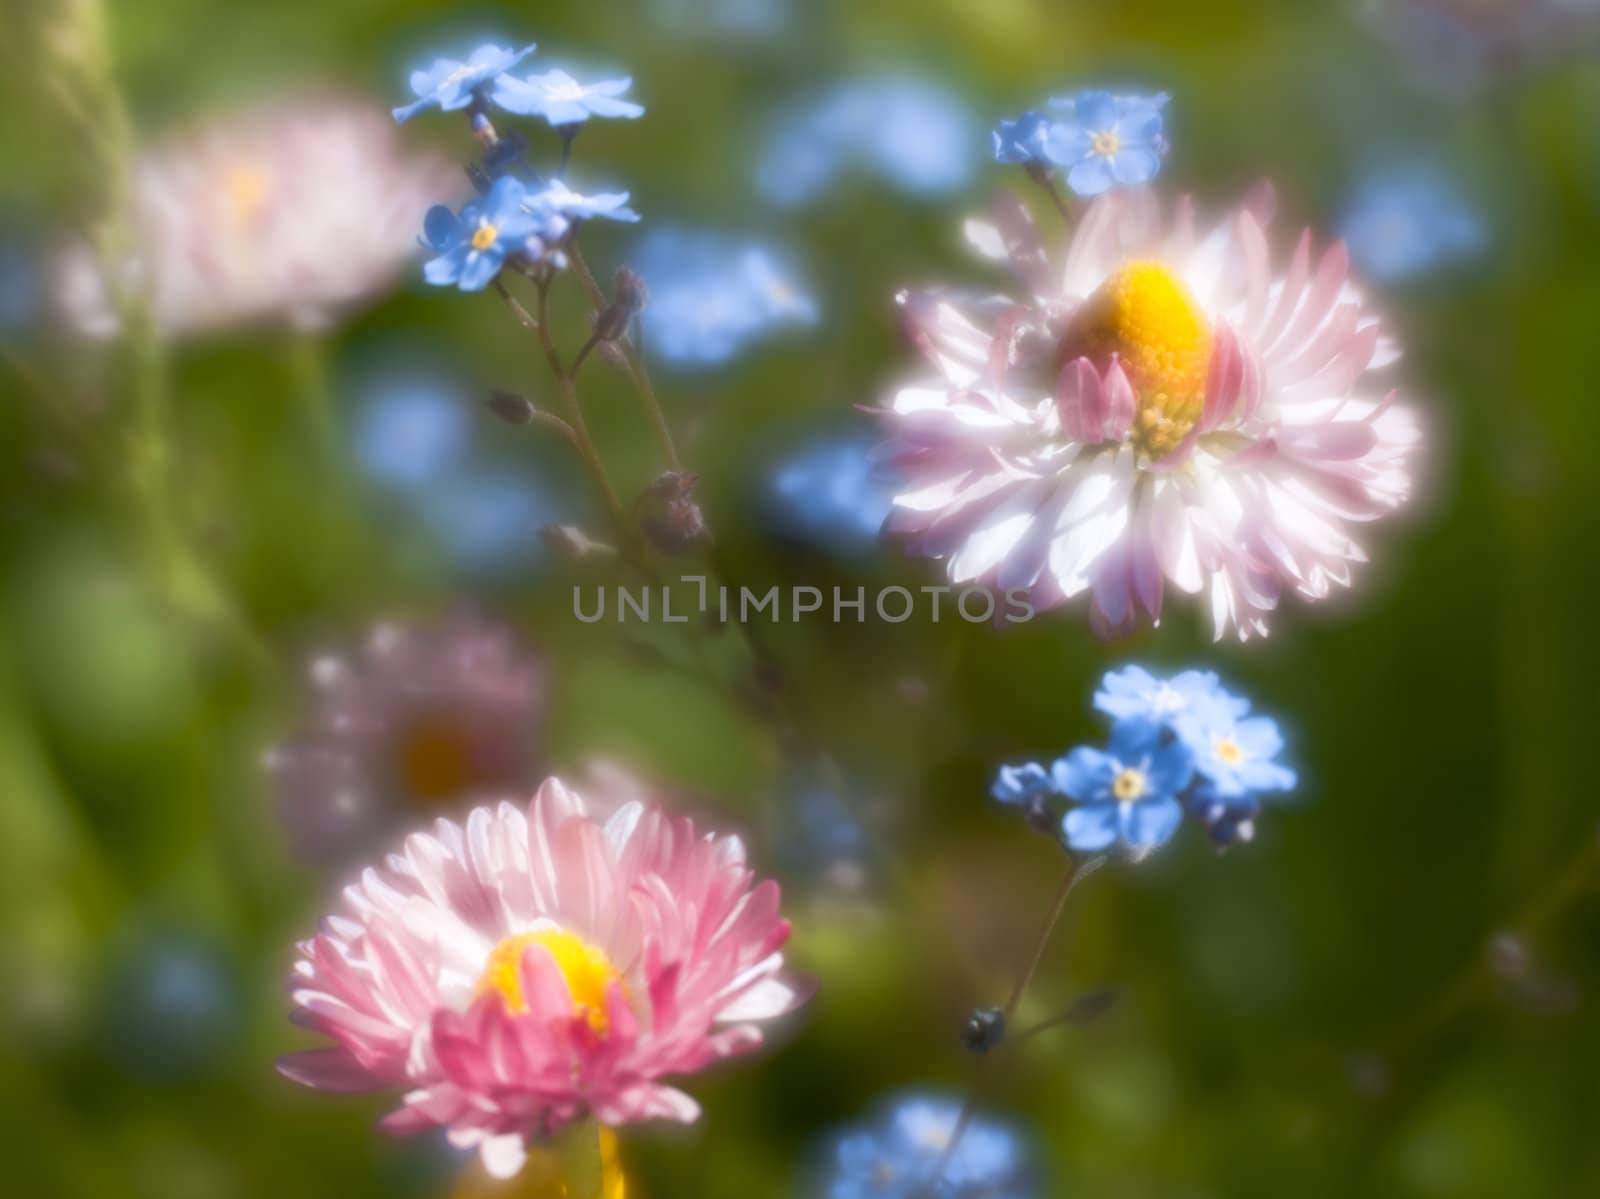 Daisy and forget-me-not by mulden